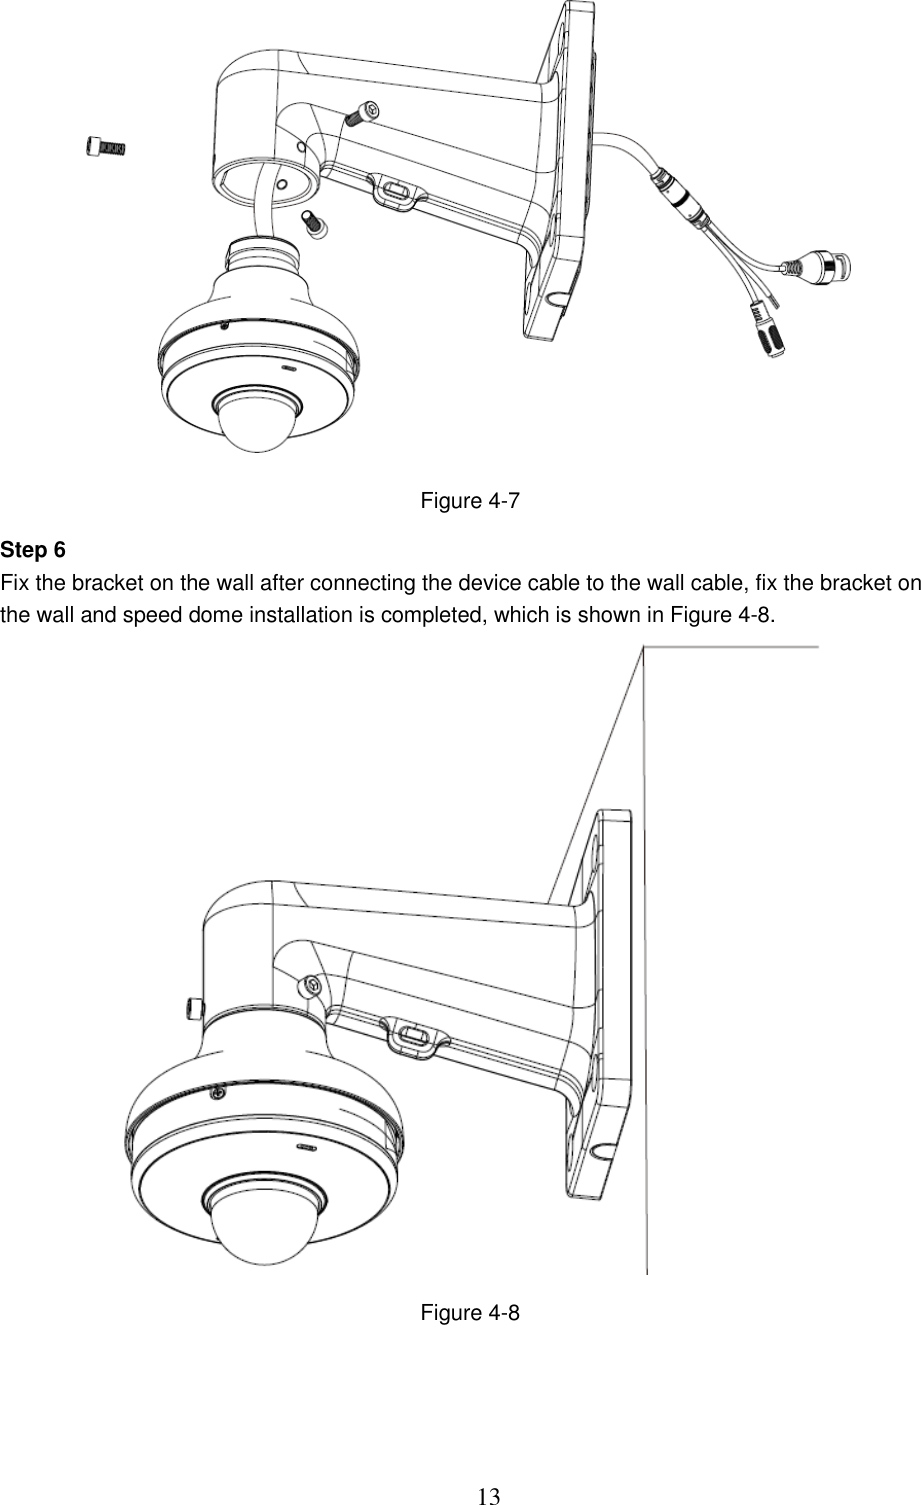  13  Figure 4-7 Step 6 Fix the bracket on the wall after connecting the device cable to the wall cable, fix the bracket on the wall and speed dome installation is completed, which is shown in Figure 4-8.  Figure 4-8  